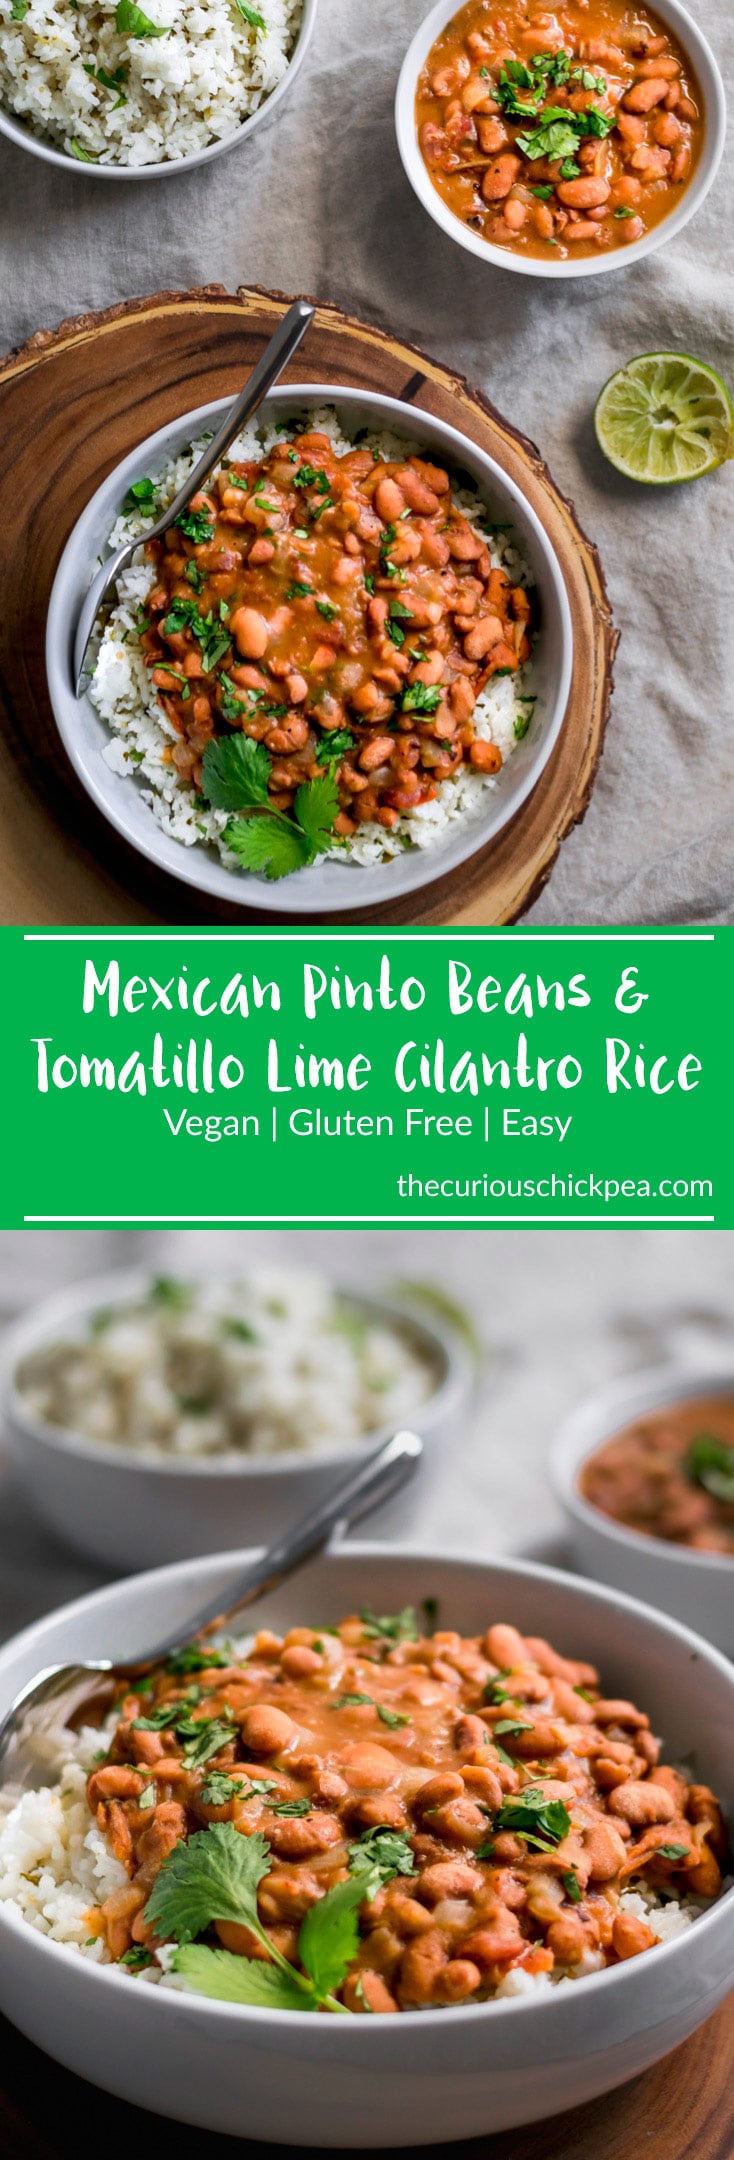 Mexican Pinto Beans & Tomatillo Cilantro Lime Rice | Pinto beans are cooked in the oven until tender and soft, then finished on the stovetop for flavorful, restaurant style, creamy beans. The rice is flavored with tomatillos, cilantro, and lime for the perfect tangy accompaniment | thecuriouschickpea.com #vegan #riceandbeans